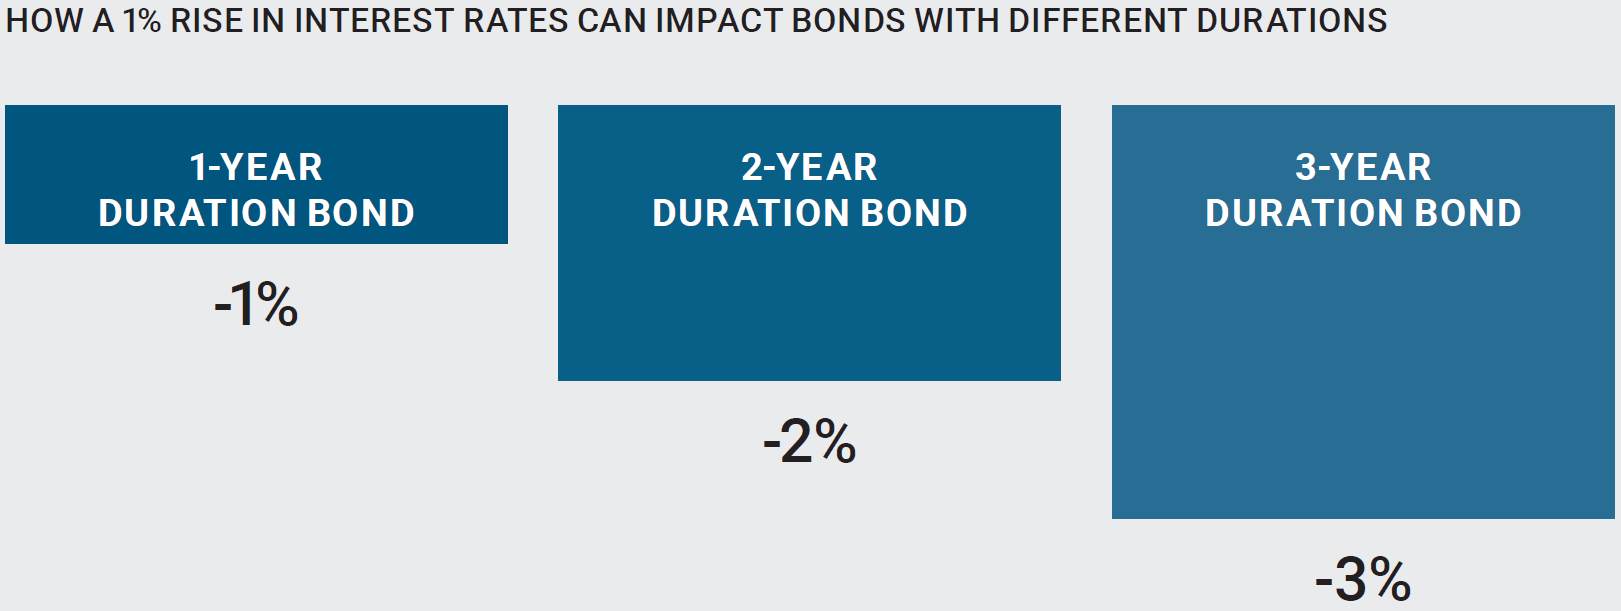 HOW A 1% RISE IN INTEREST RATES CAN IMPACT BONDS WITH DIFFERENT DURATIONS